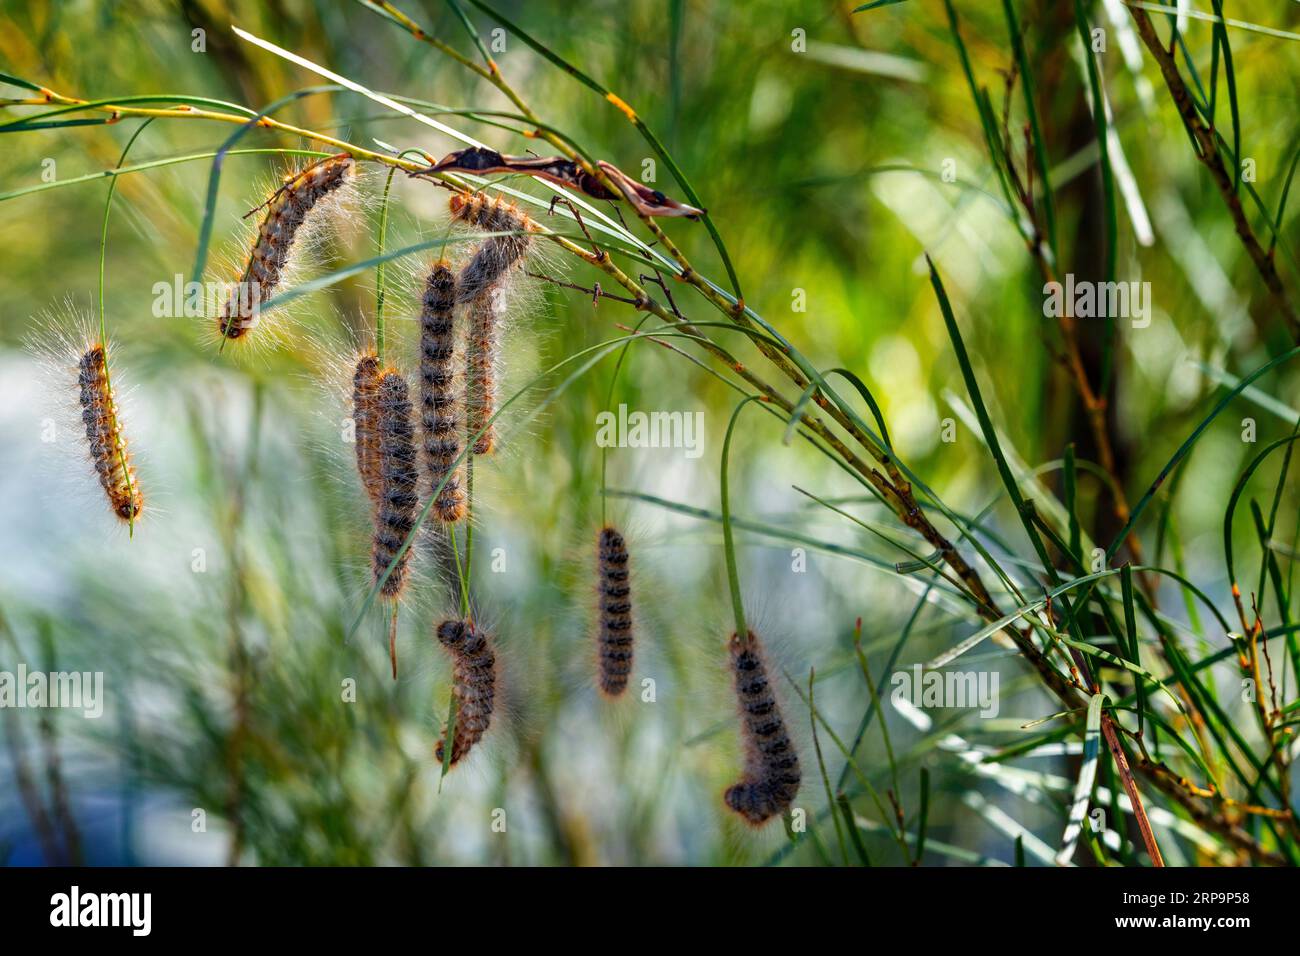 Group of hairy caterpillars hanging from tree branch. Stanthorpe Queensland Australia Stock Photo